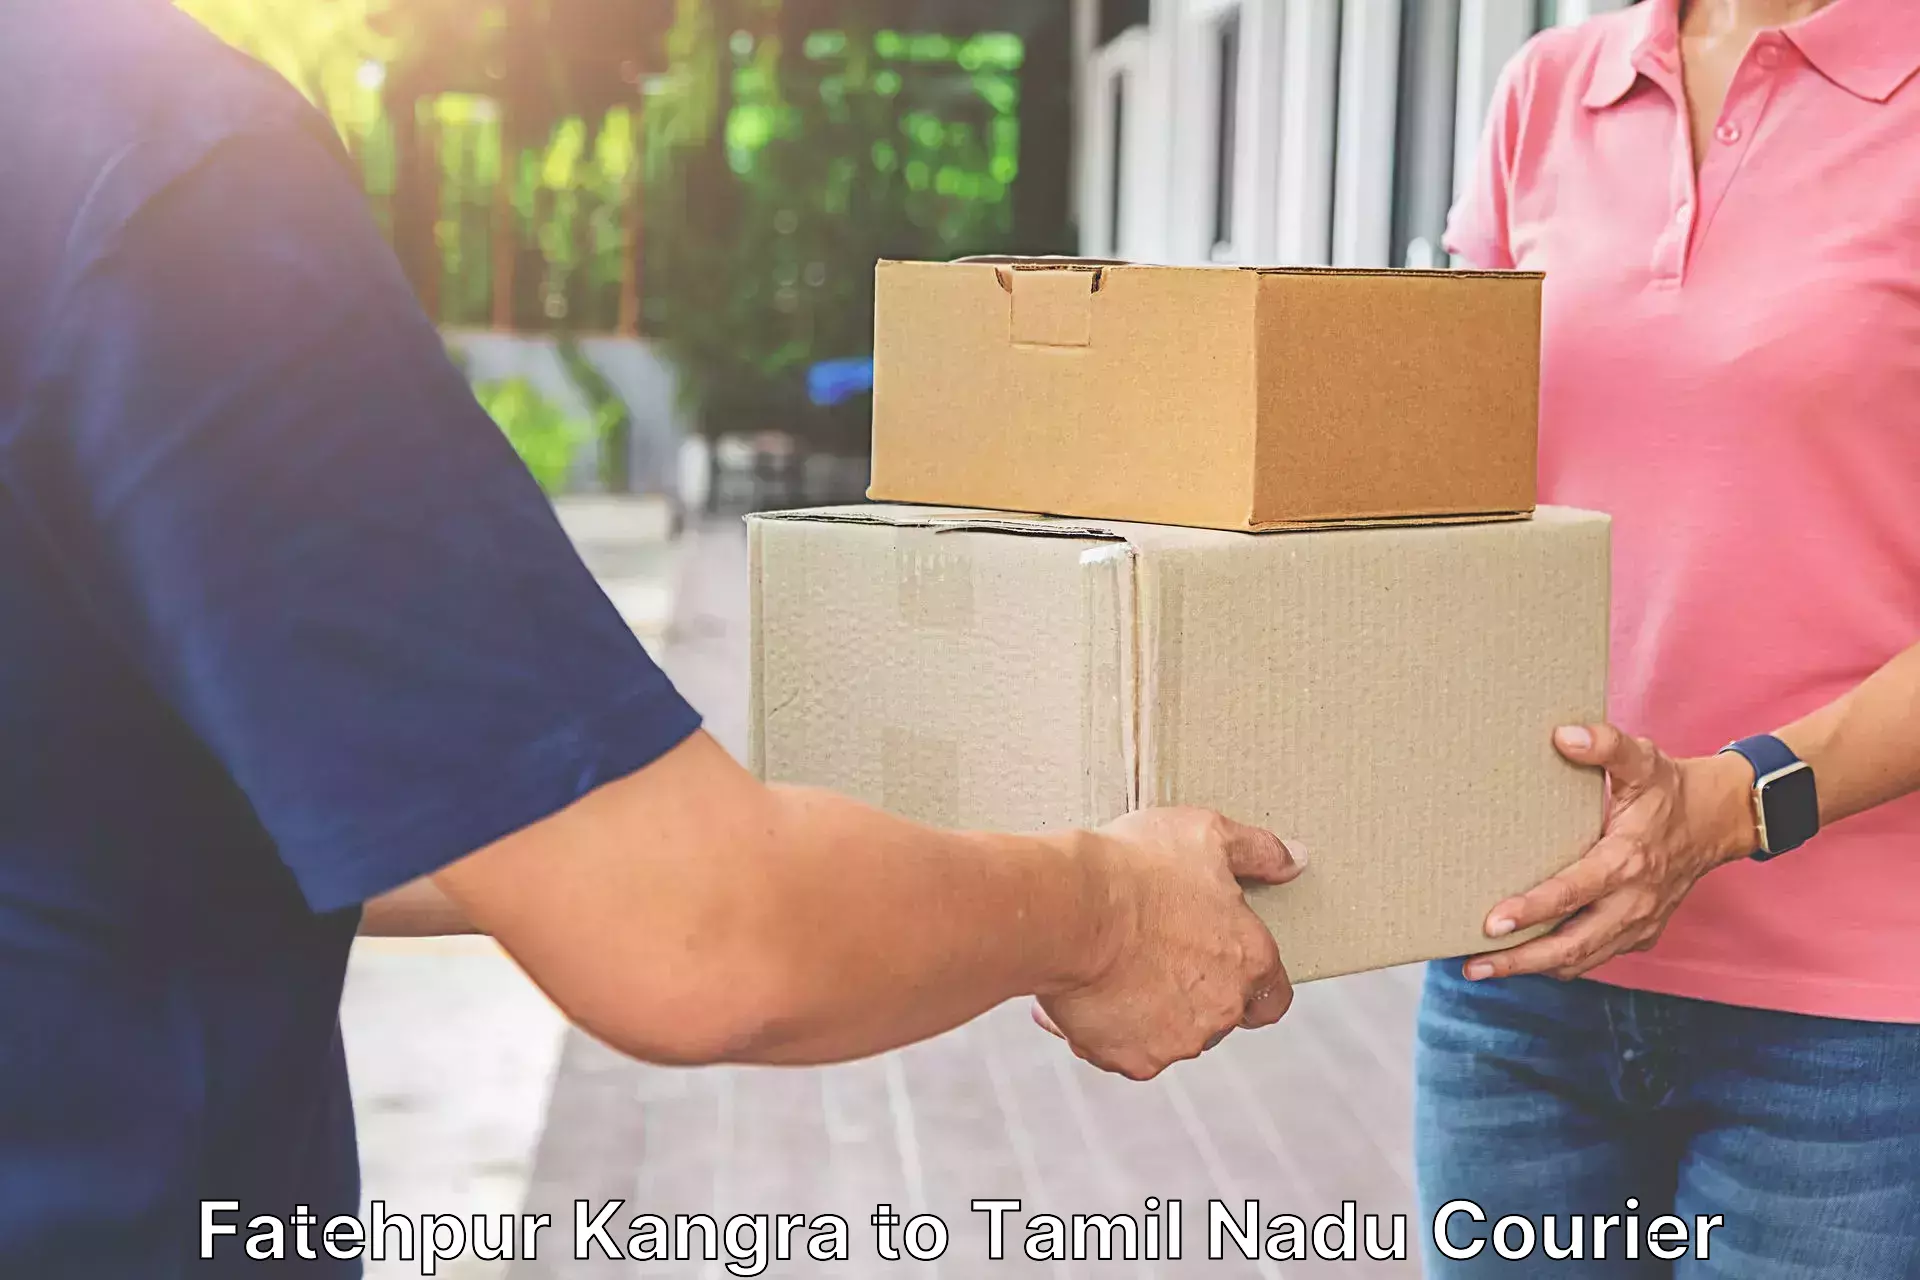 Special handling courier Fatehpur Kangra to Mettala